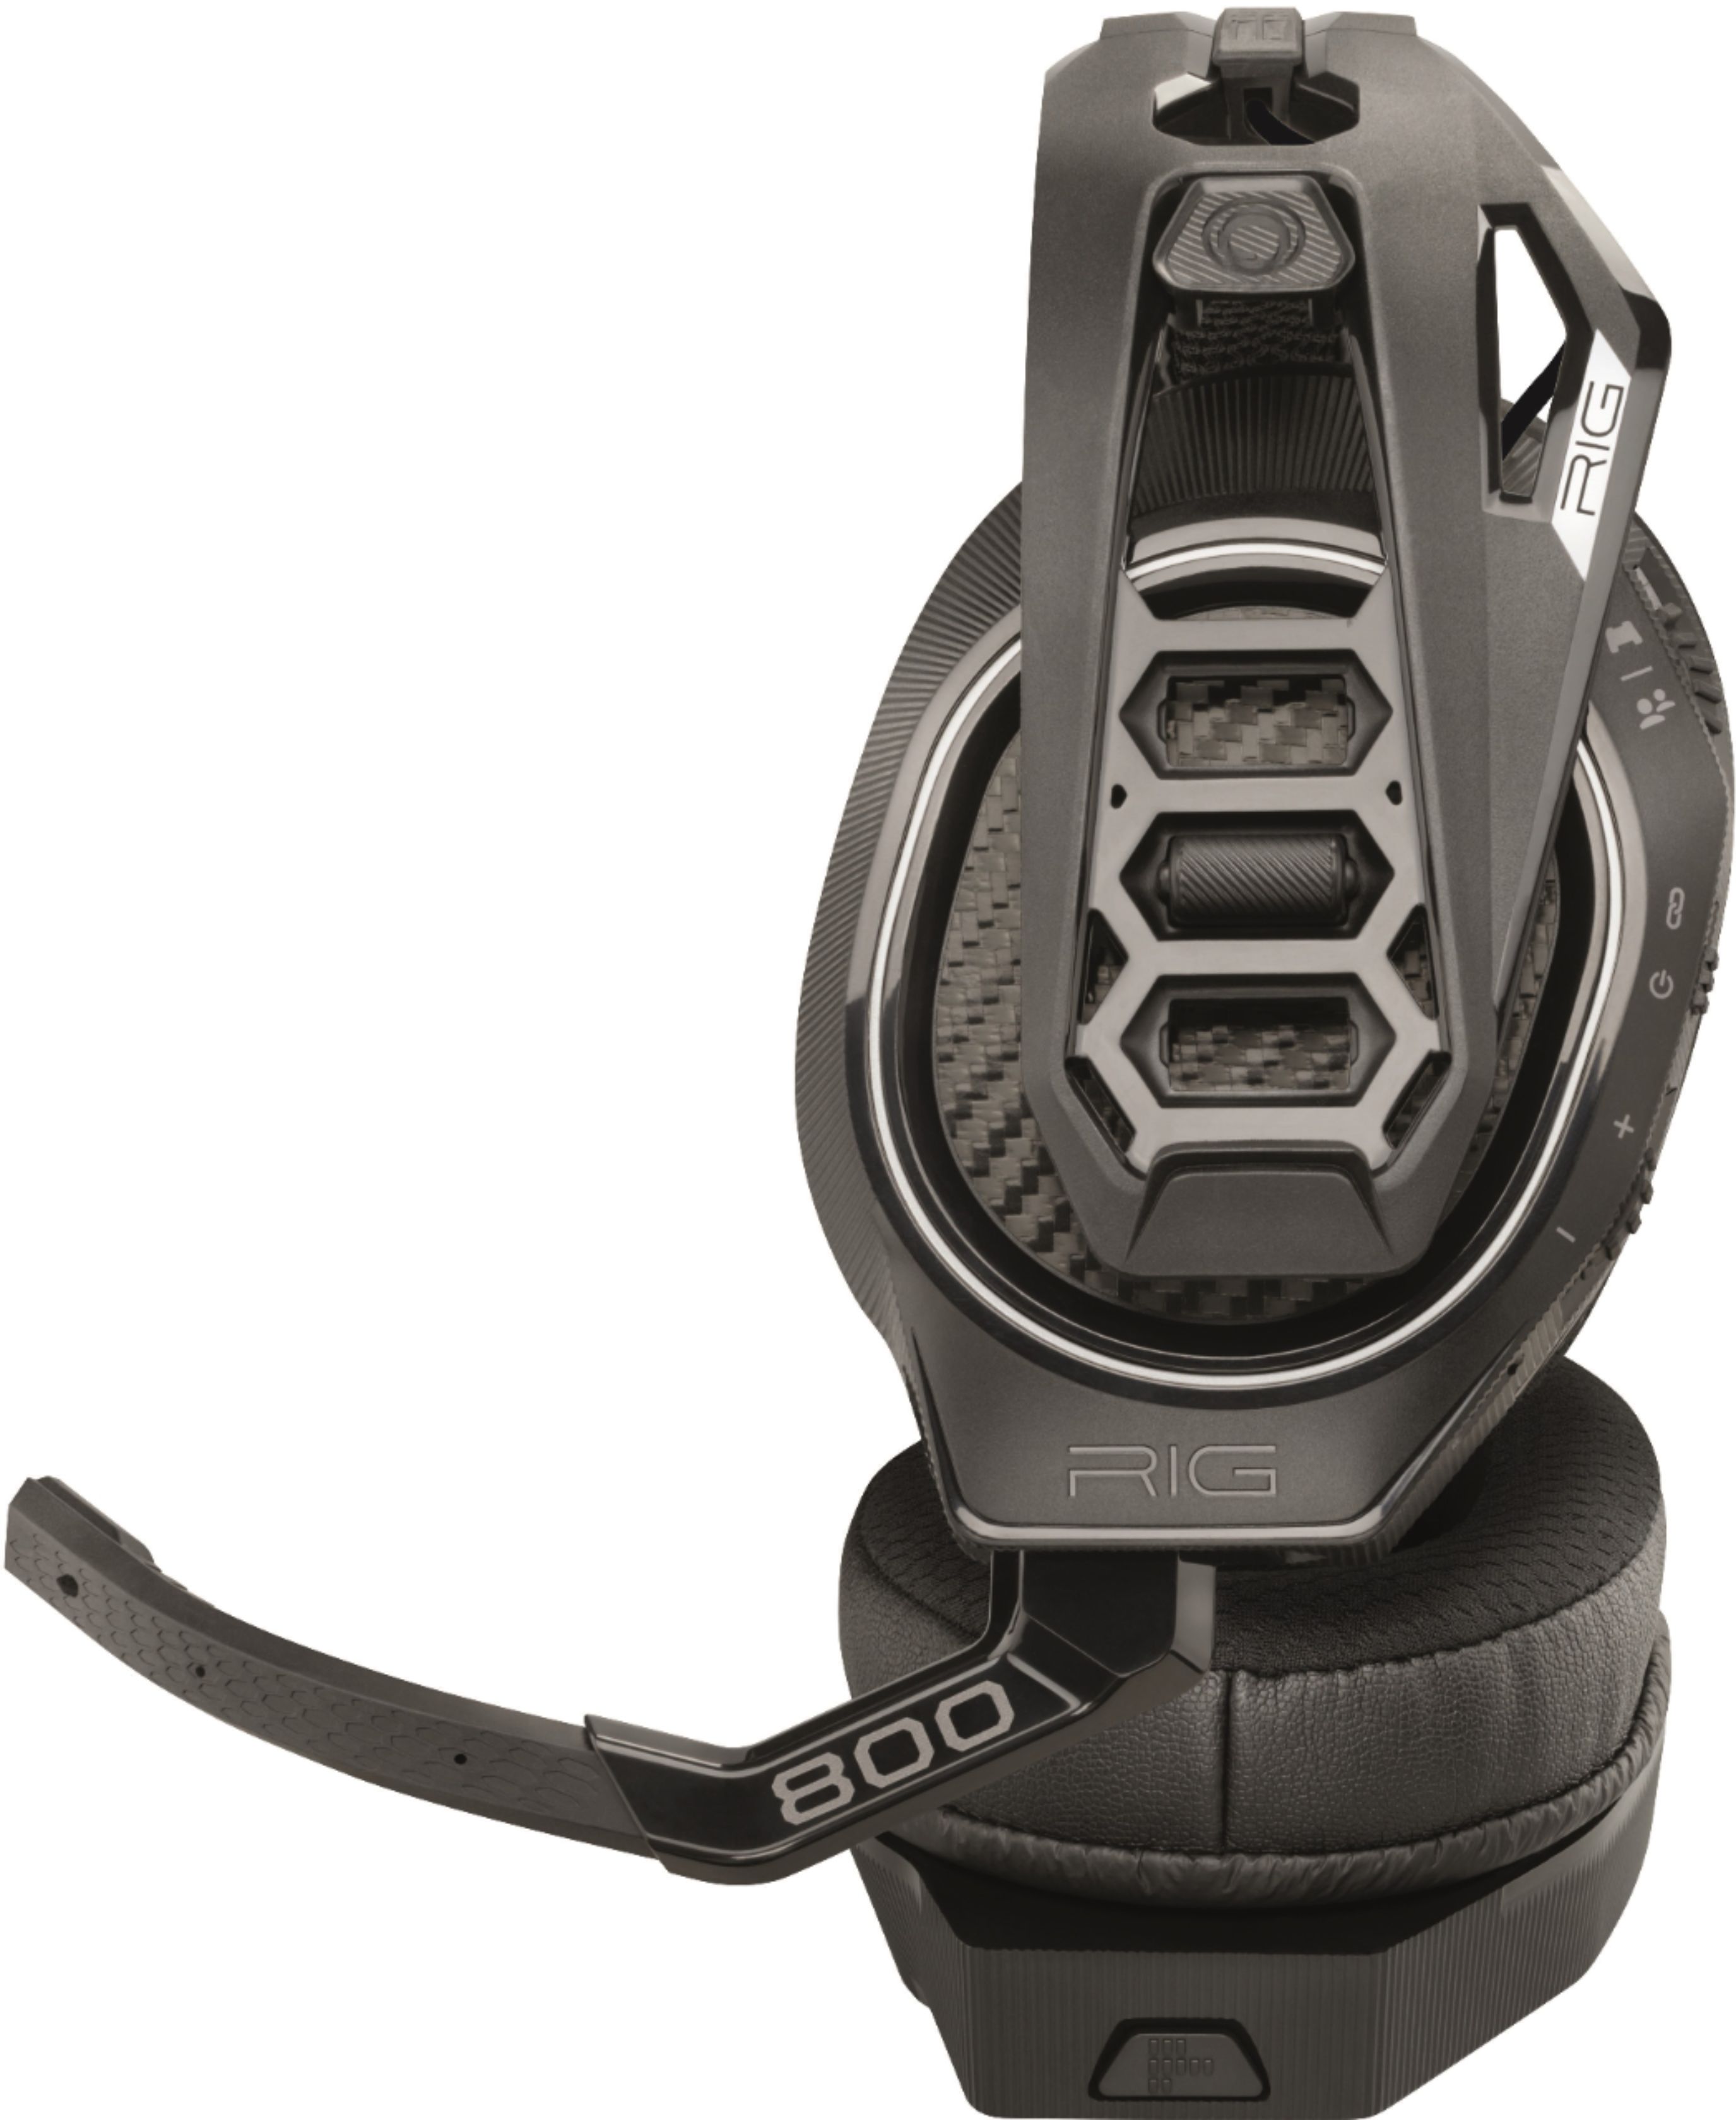 rig 800lx wireless gaming headset